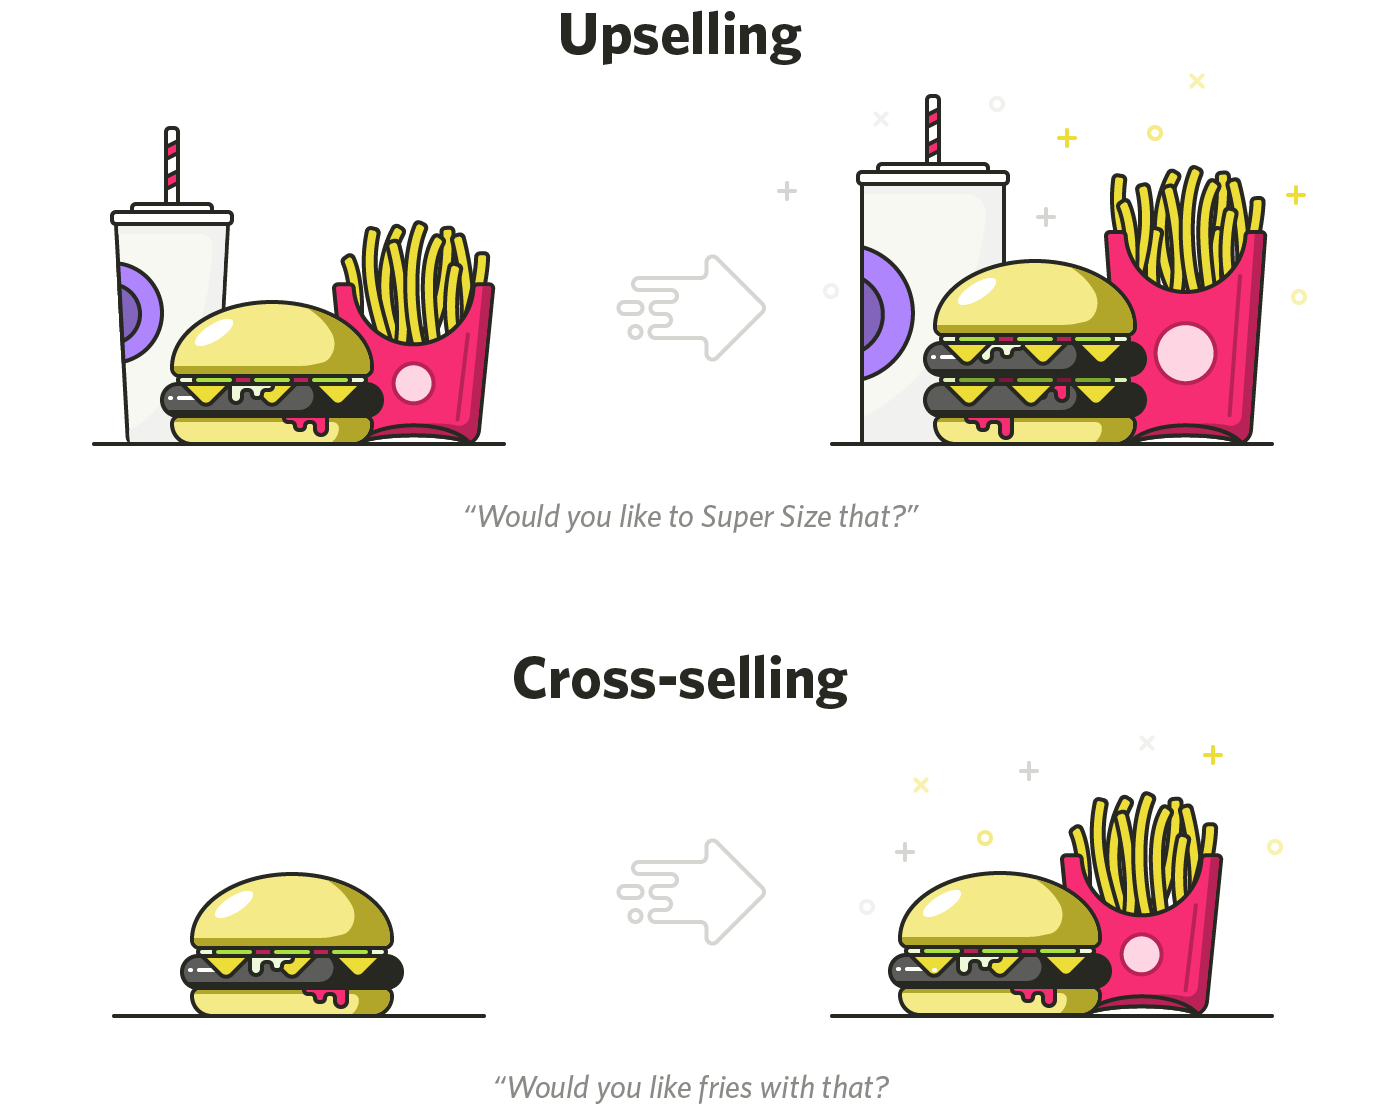 Up-selling and cross-selling